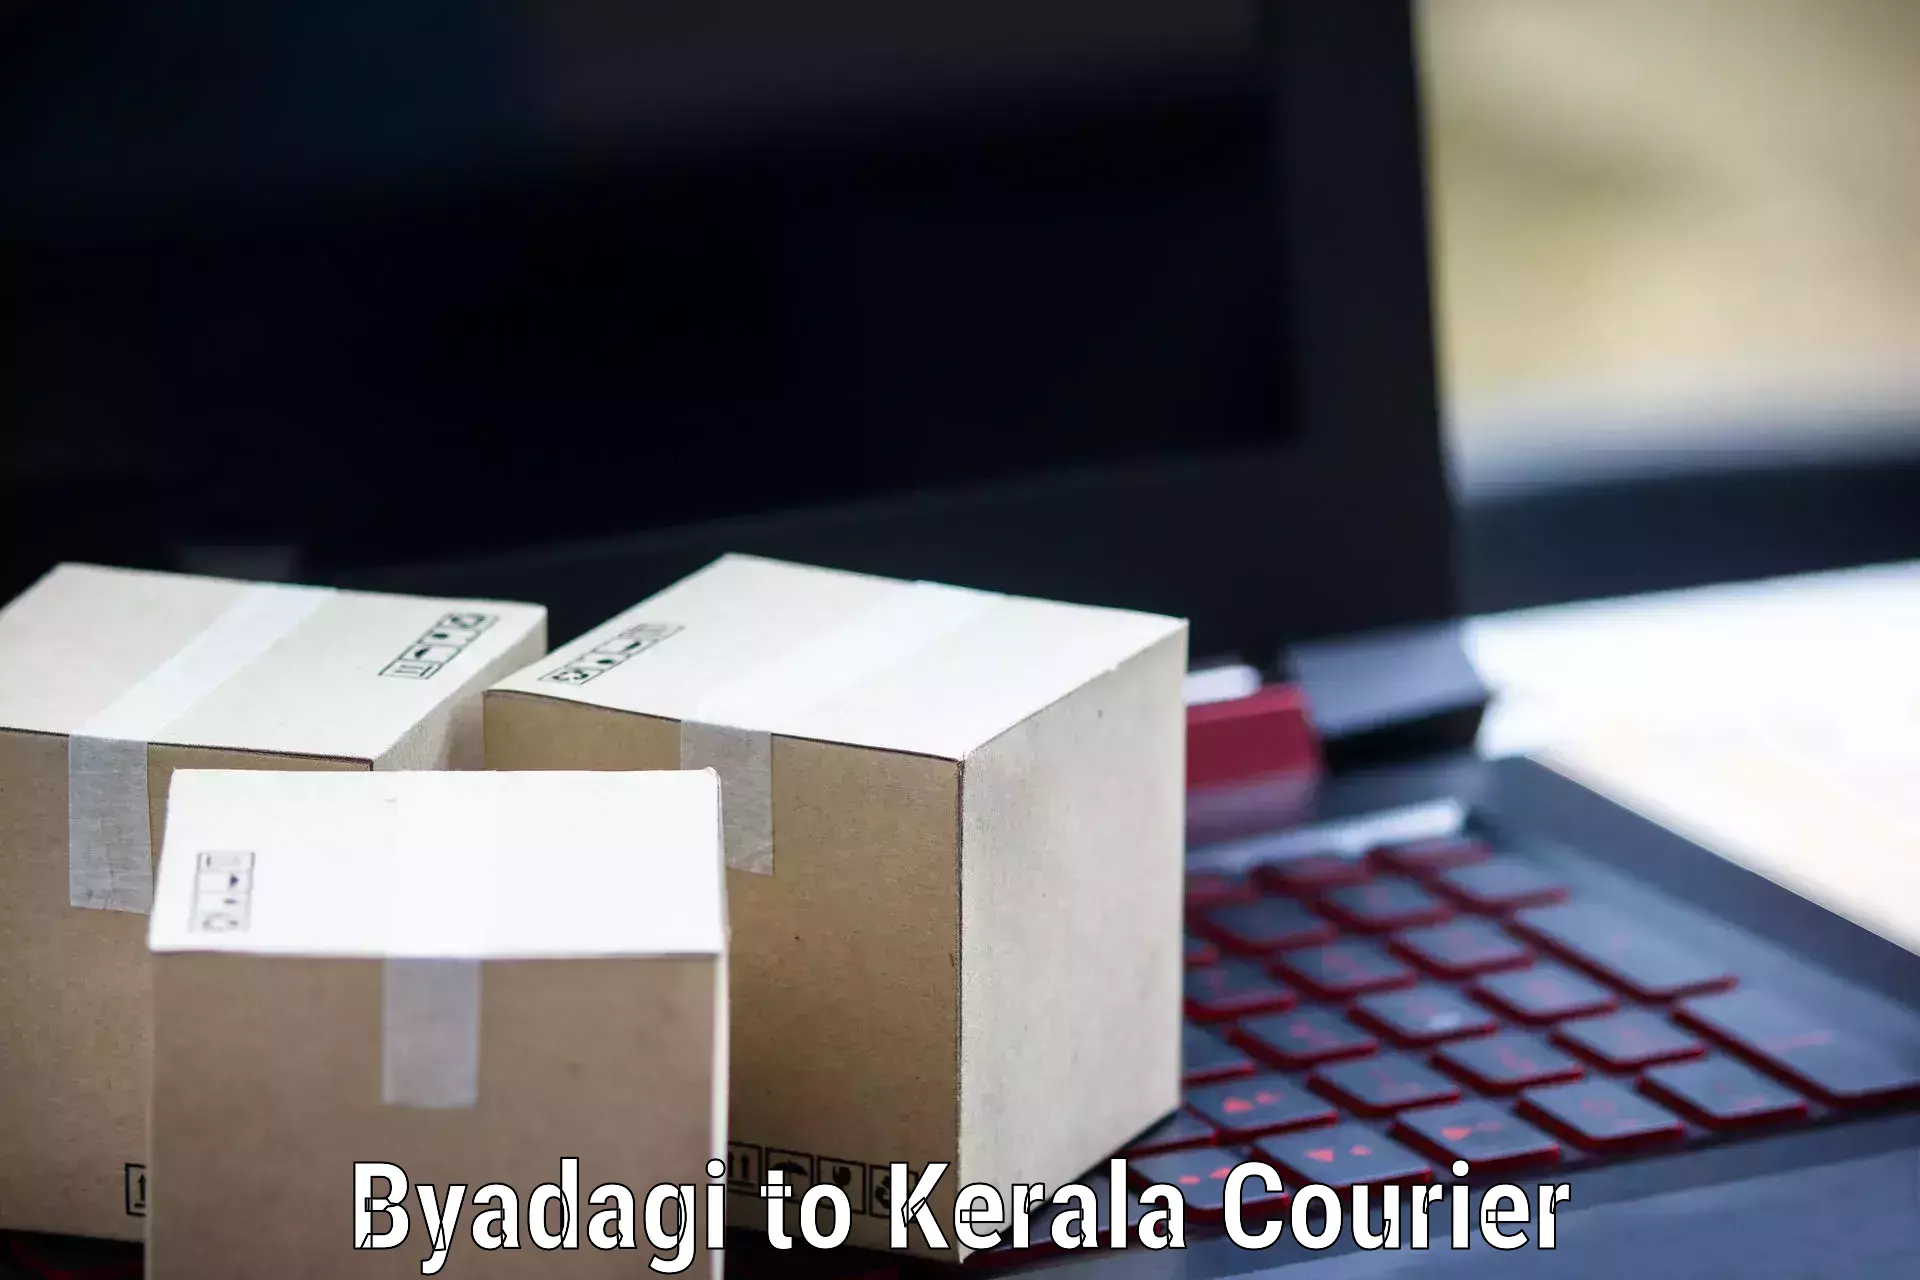 Package delivery network Byadagi to Kerala